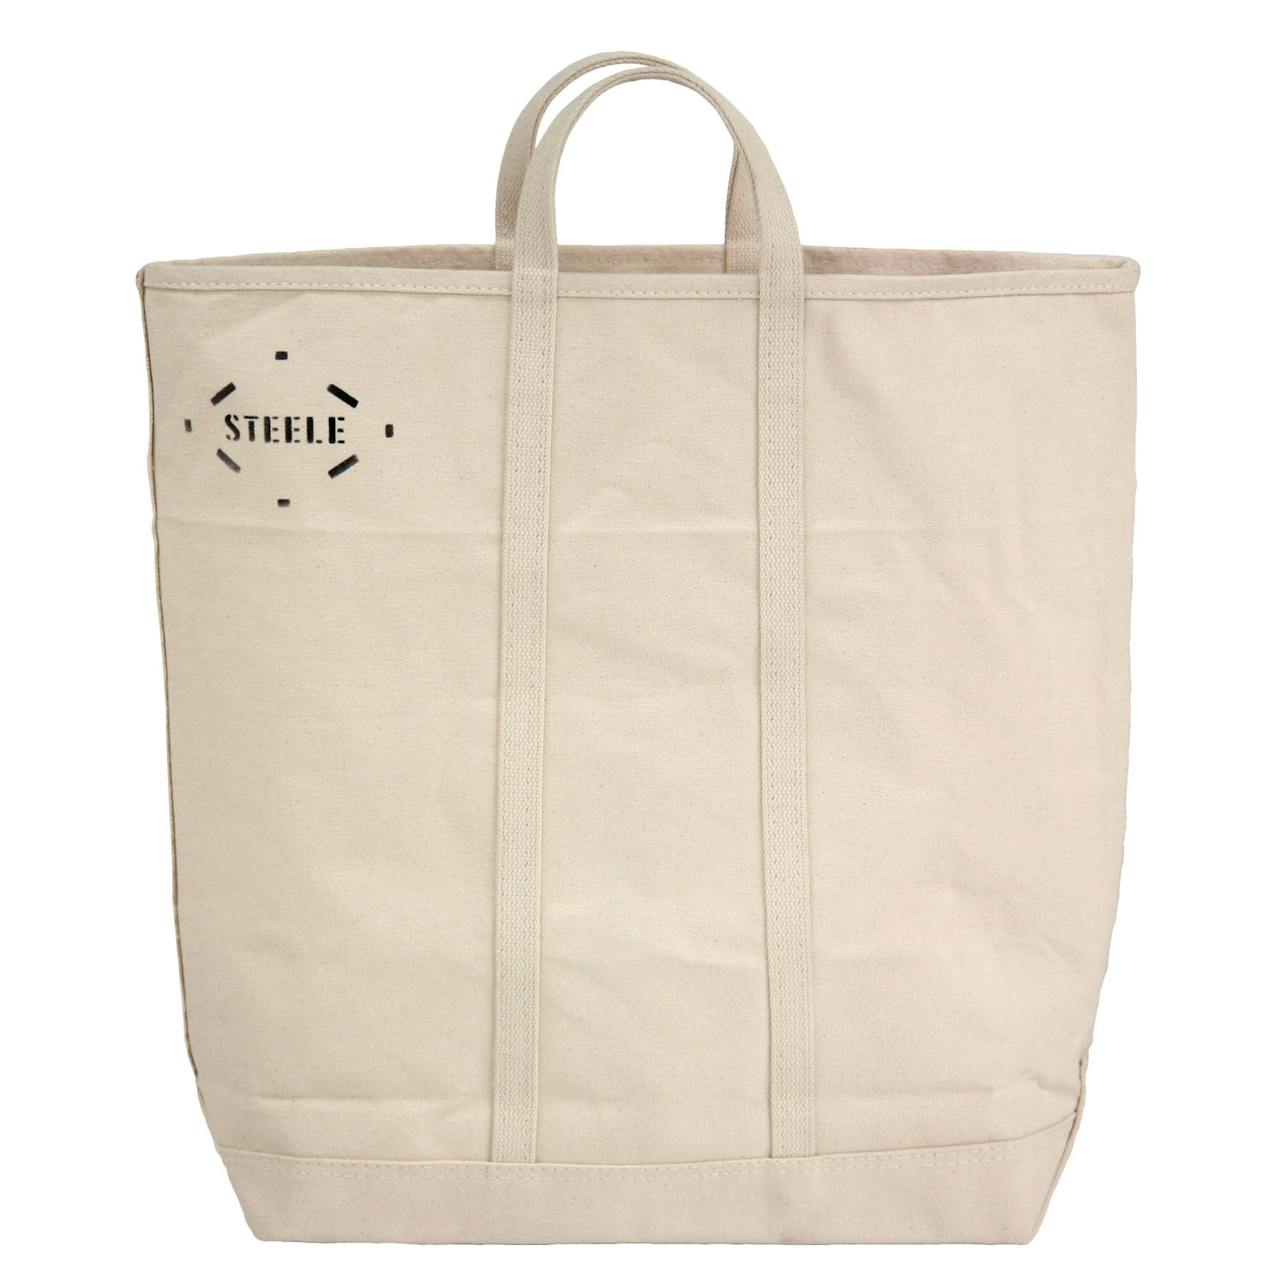 Steele Tall Natural Canvas Tote